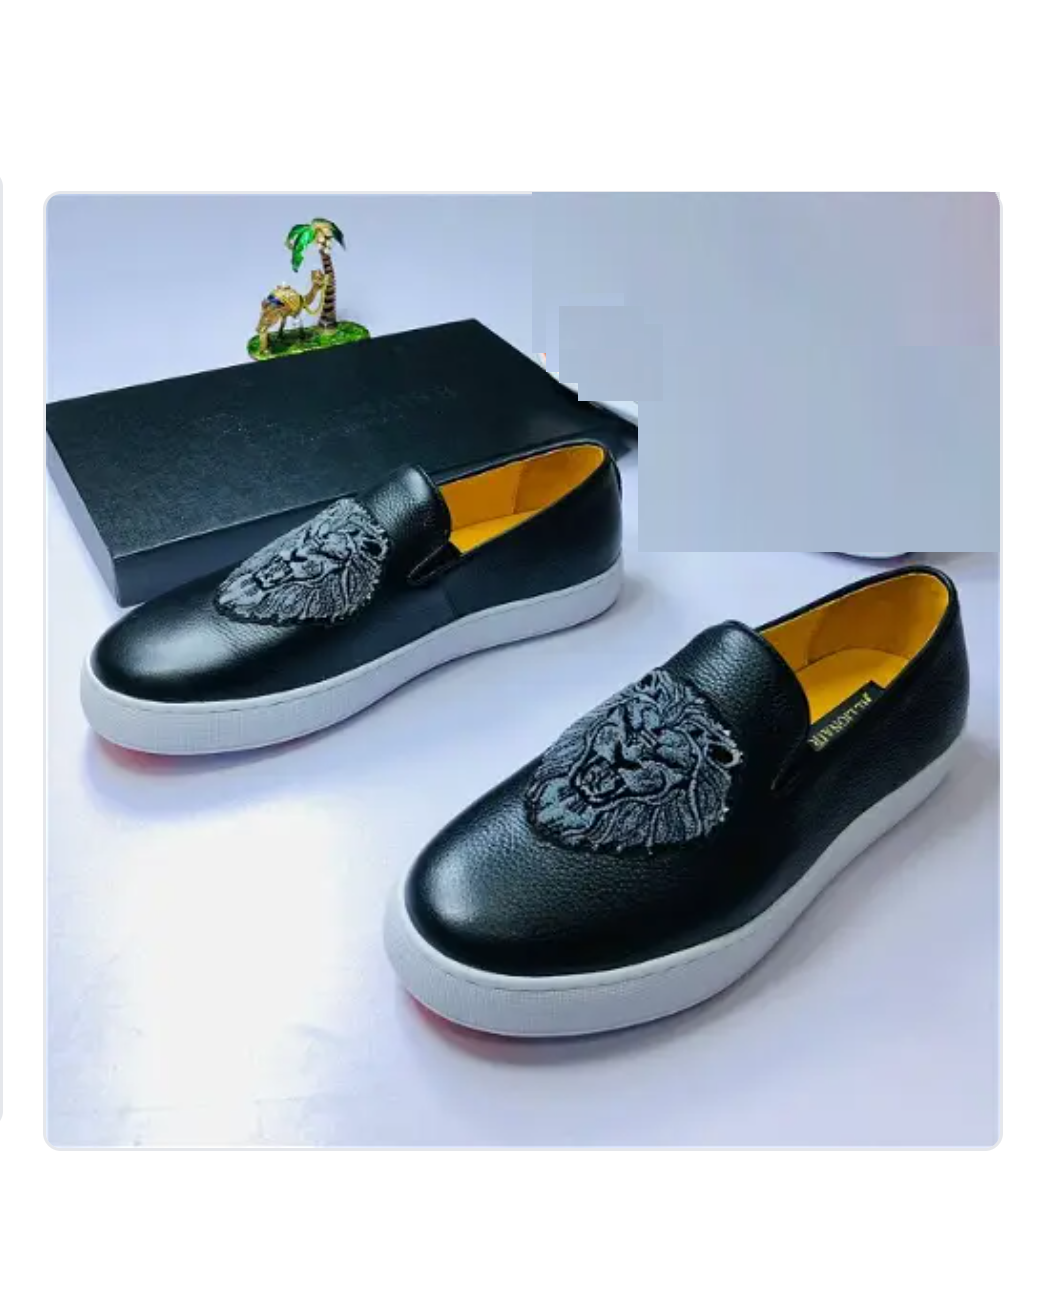 BLACK GOVERNORS CALF SKIN LION HEAD SNEAKERS